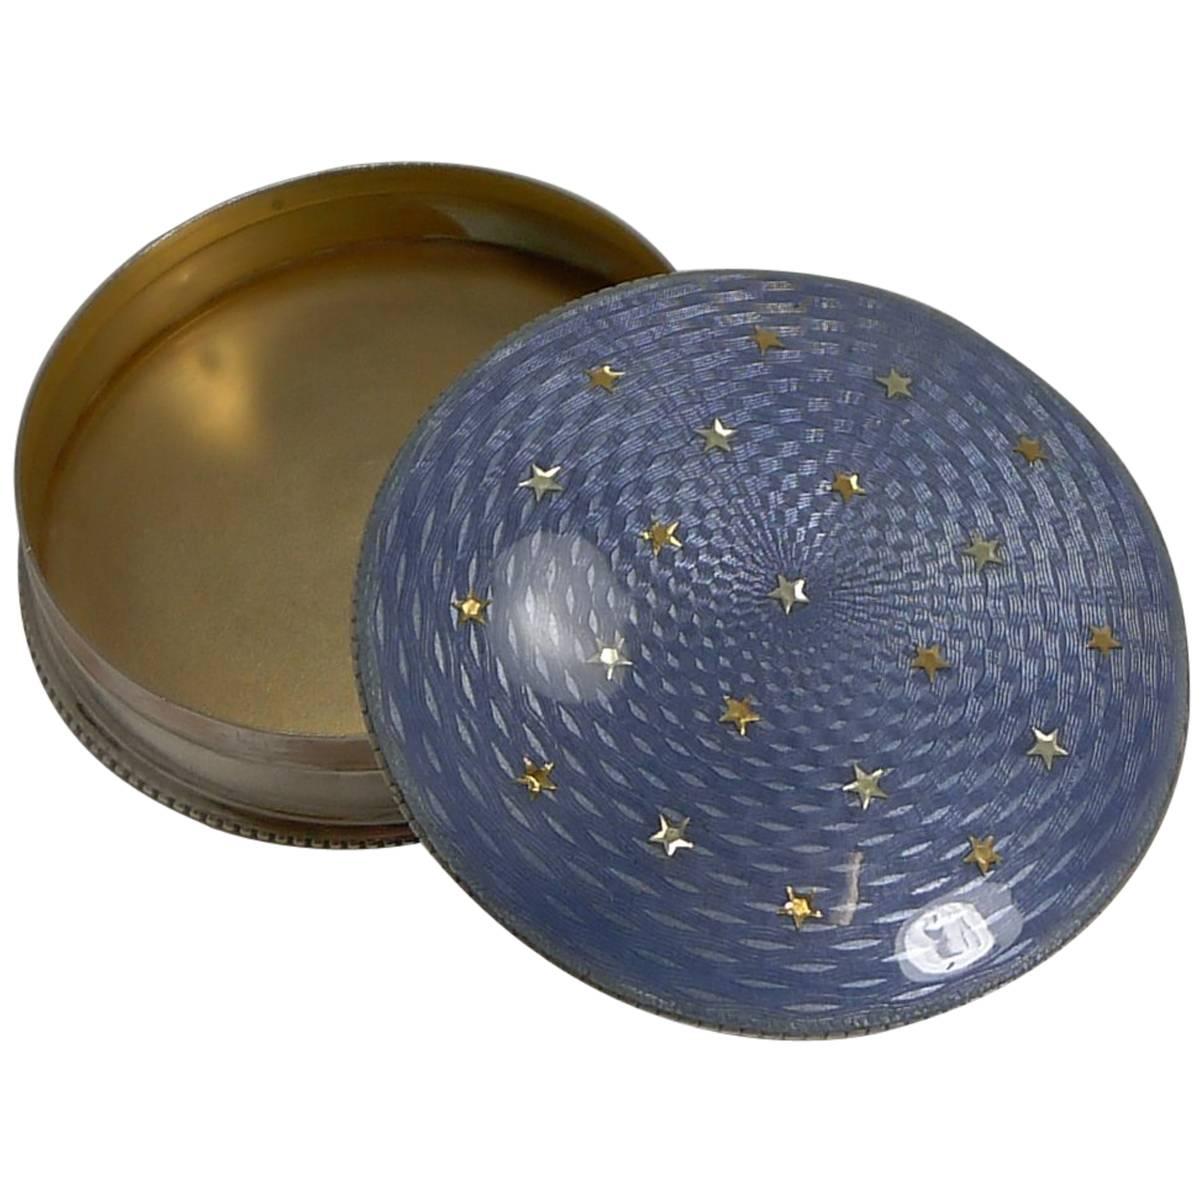 English Sterling Silver and Guilloche Enamel Box, Gold Stars